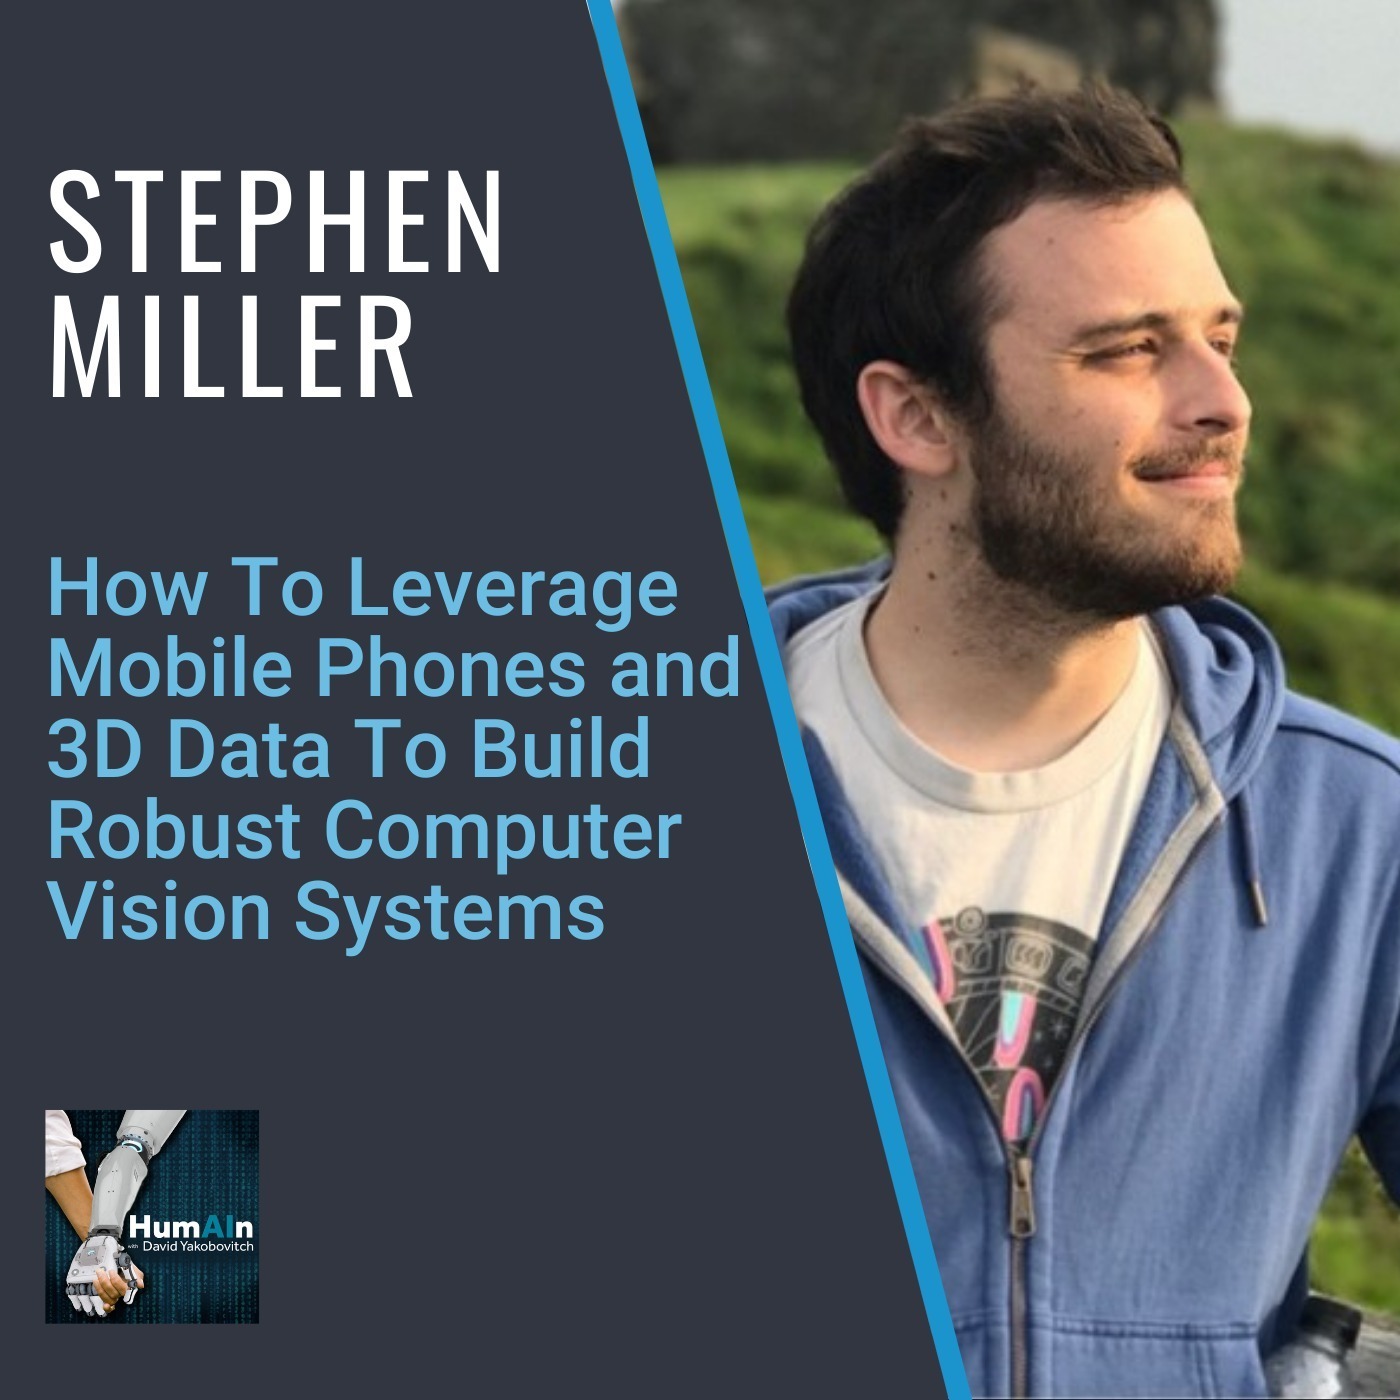 Stephen Miller: How To Leverage Mobile Phones And 3D Data To Build Robust Computer Vision Systems